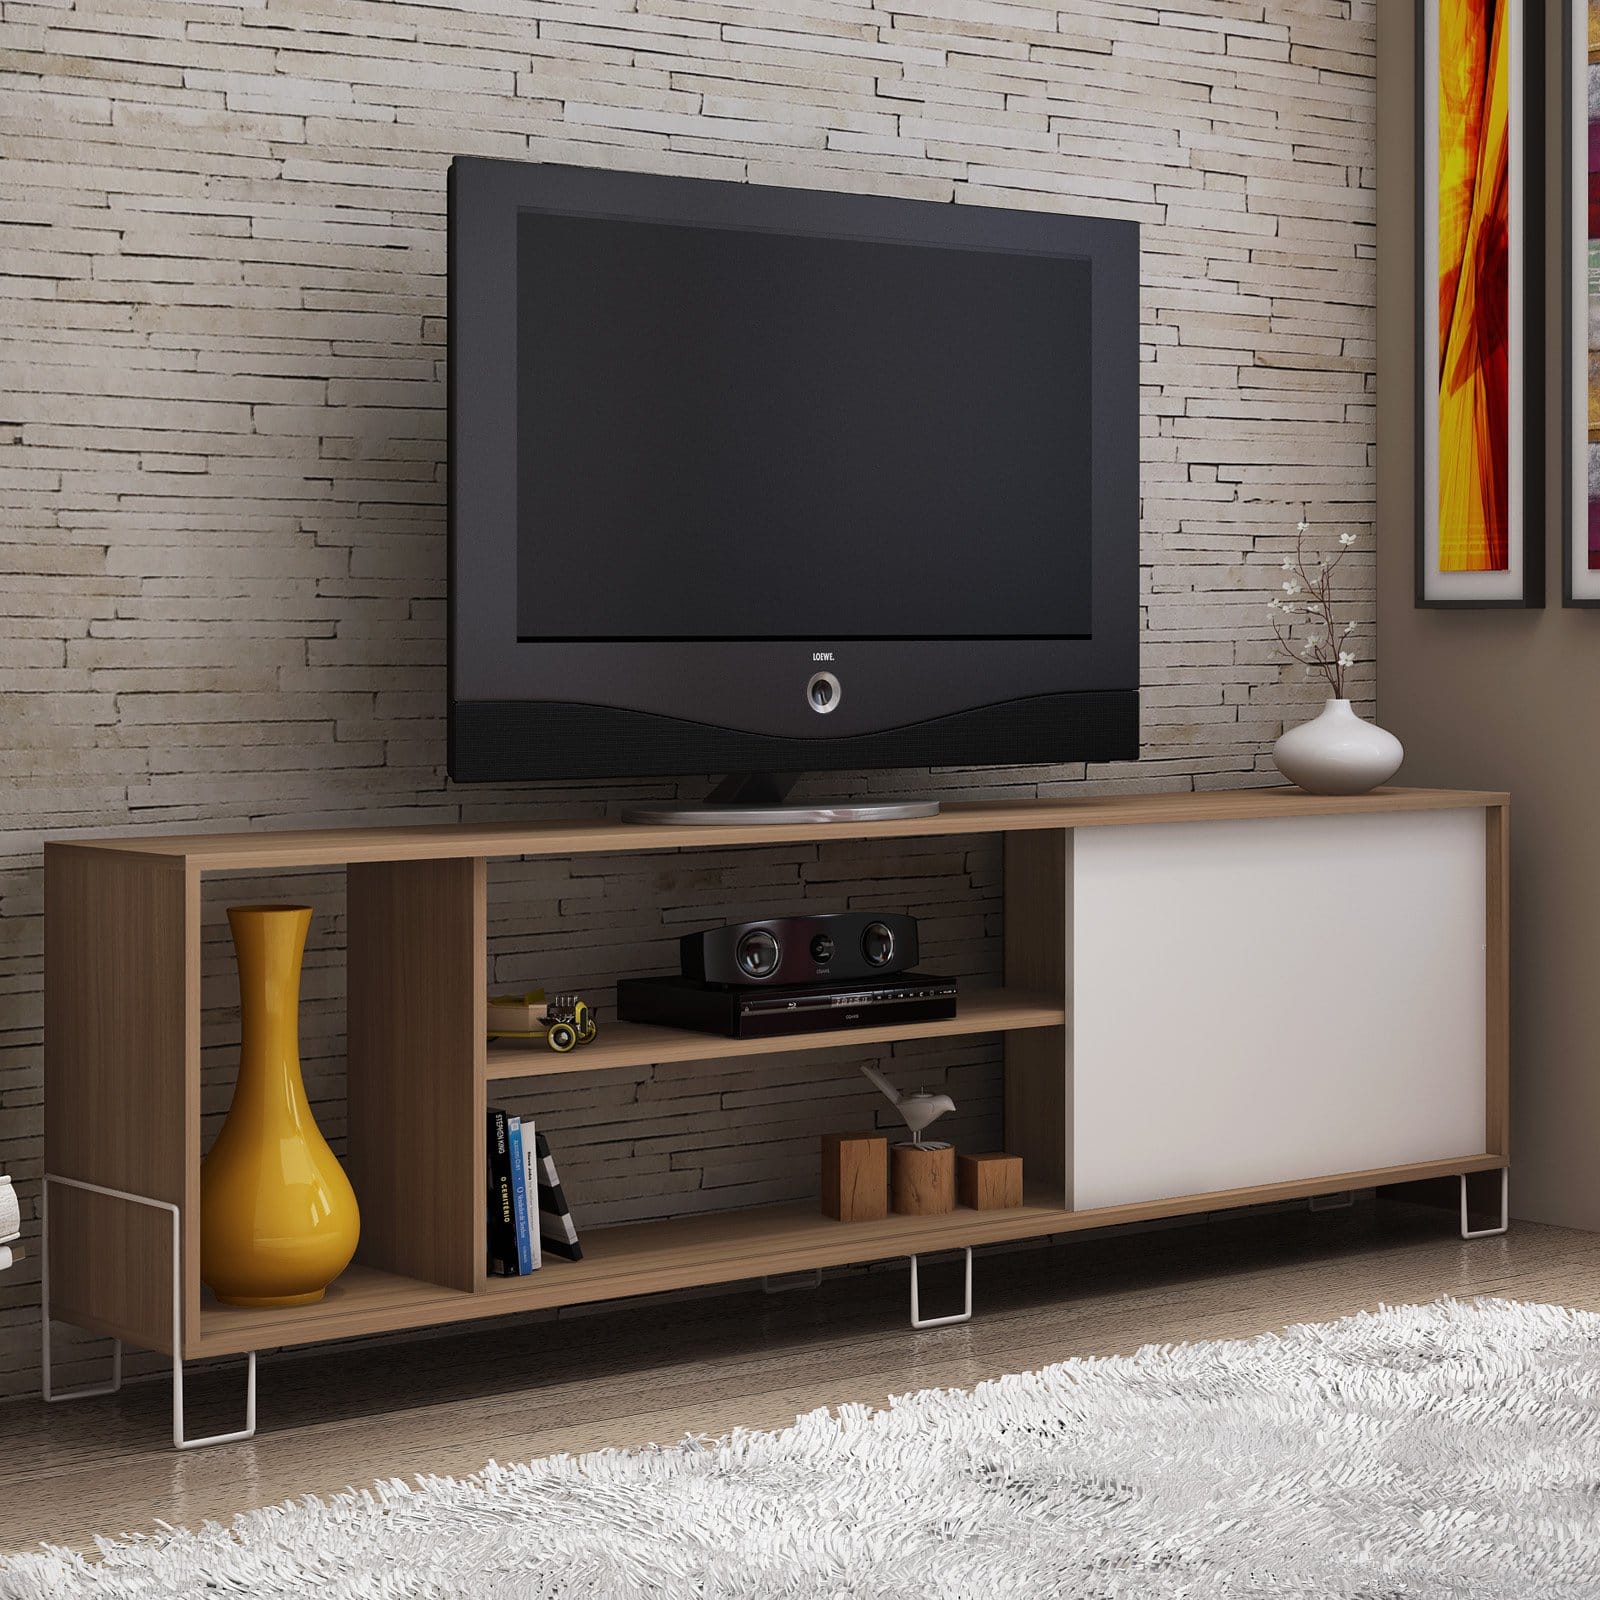 Nacka TV Stand 2.0 with 4 shelves in Oak and White - image 2 of 10